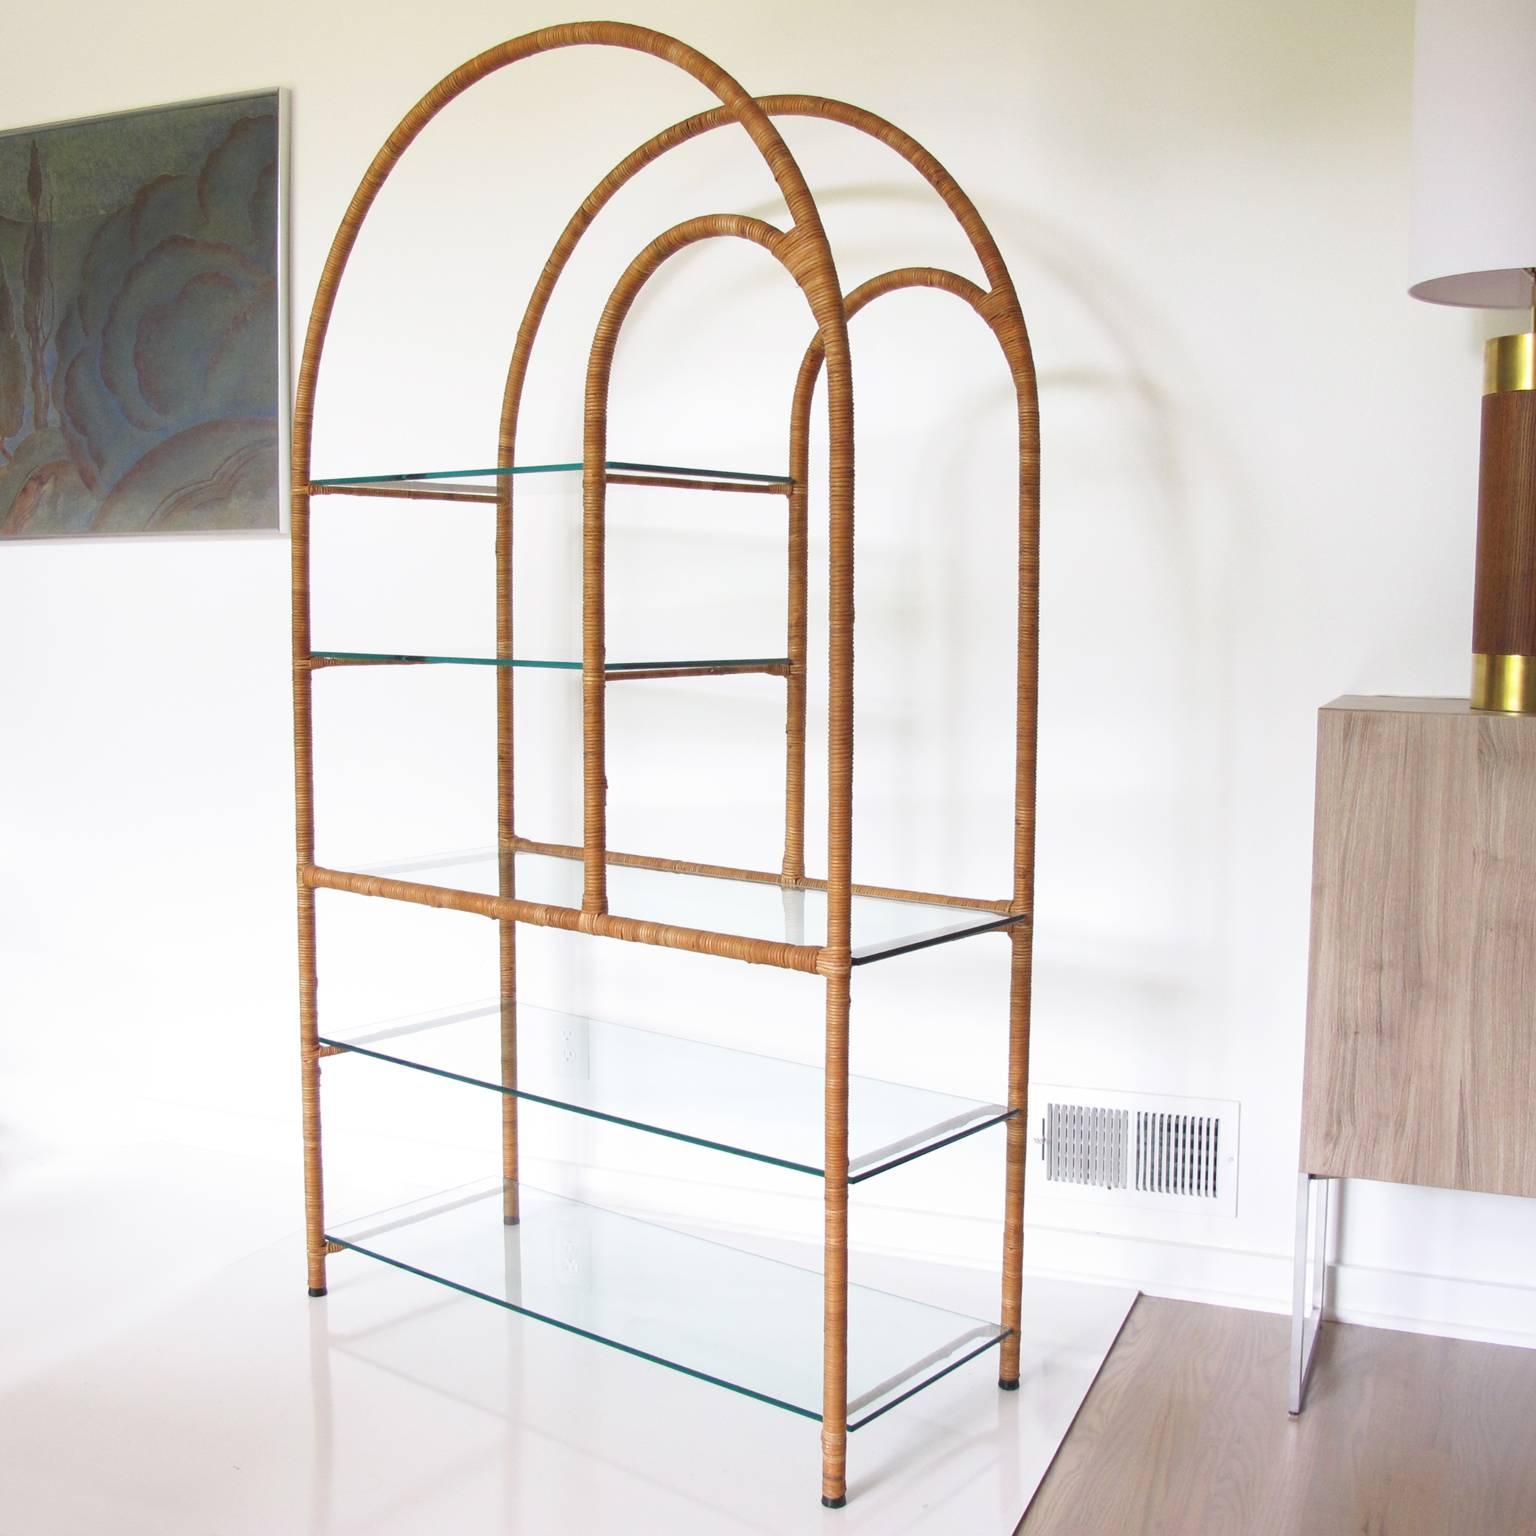 Striking Mid-Century modernist display shelf makes an ideal storage piece for a large variety of interiors. Most likely by Milo Baughman, this elegant Hollywood Regency étagère or bookcase is sculpturally designed with rattan or wicker wrapped